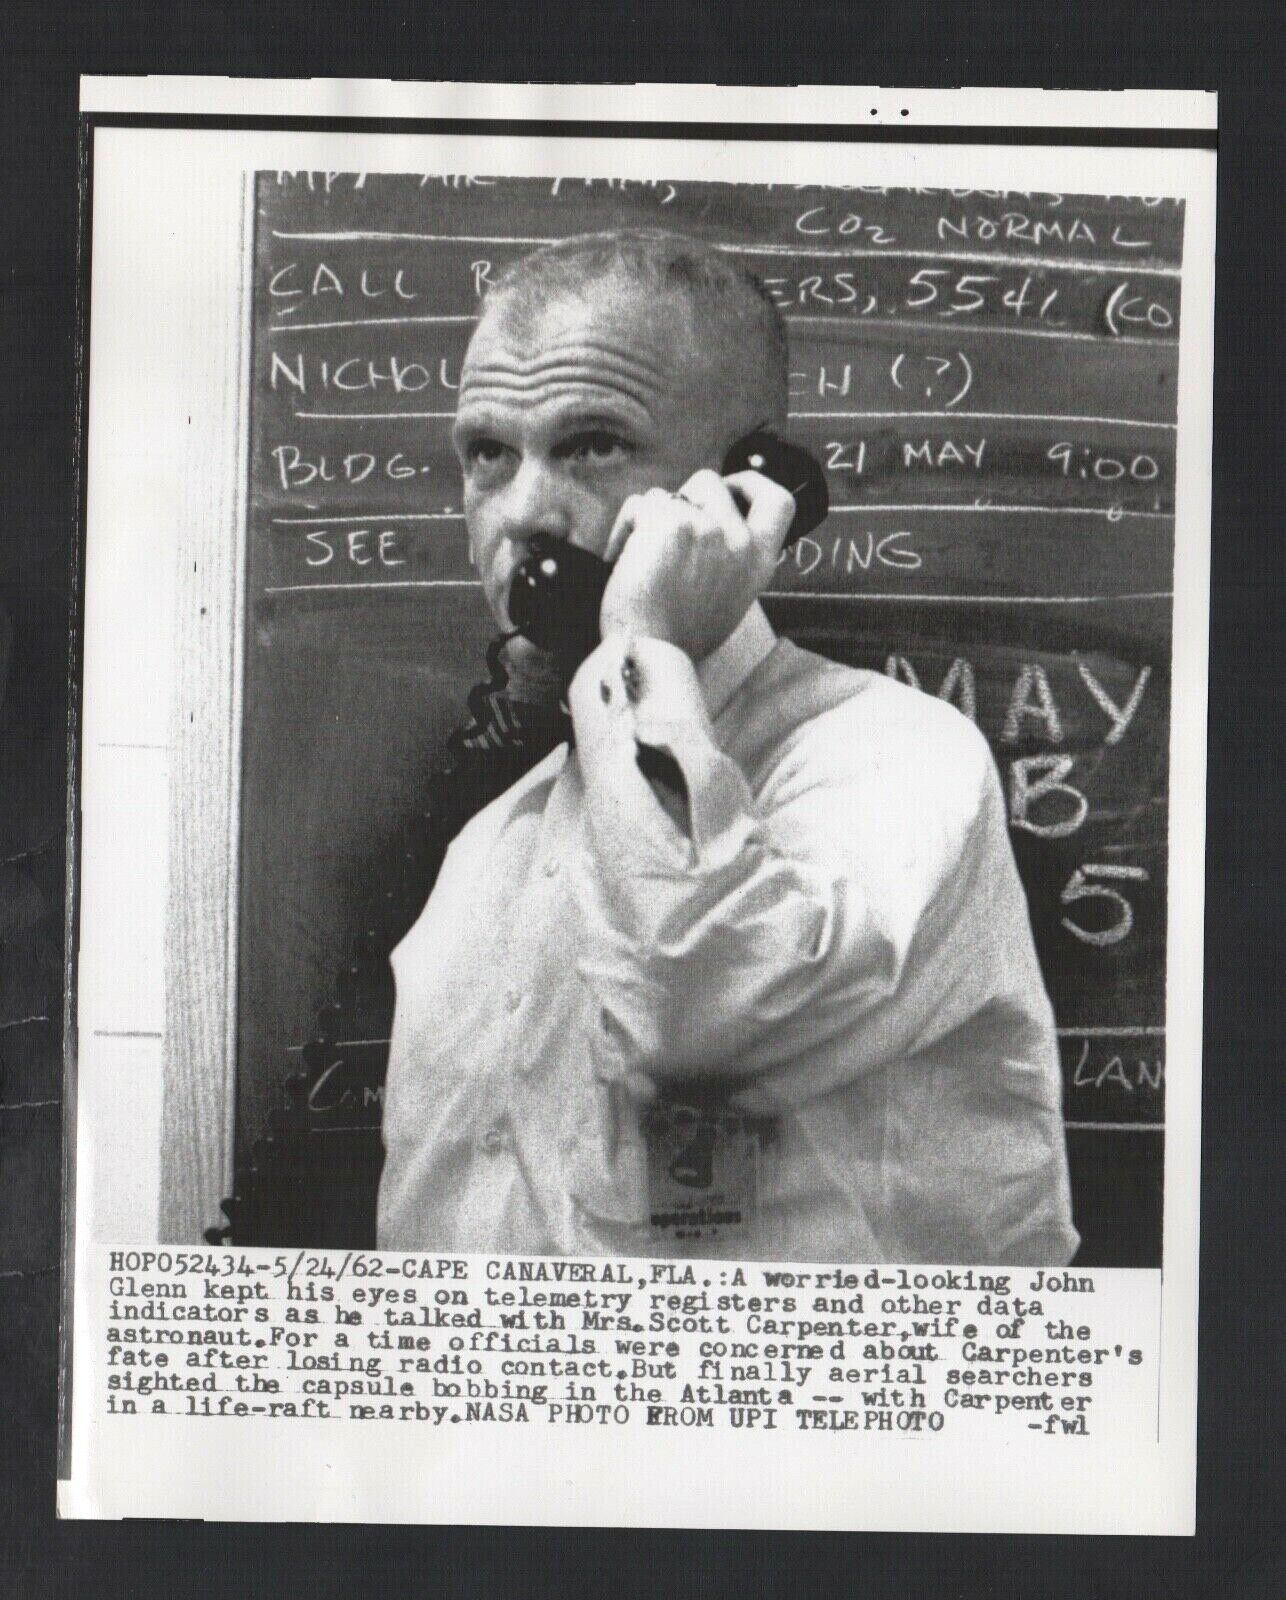 1962 Press Photo, John Glenn, Worried Look at Telemetry Registers and Other Data